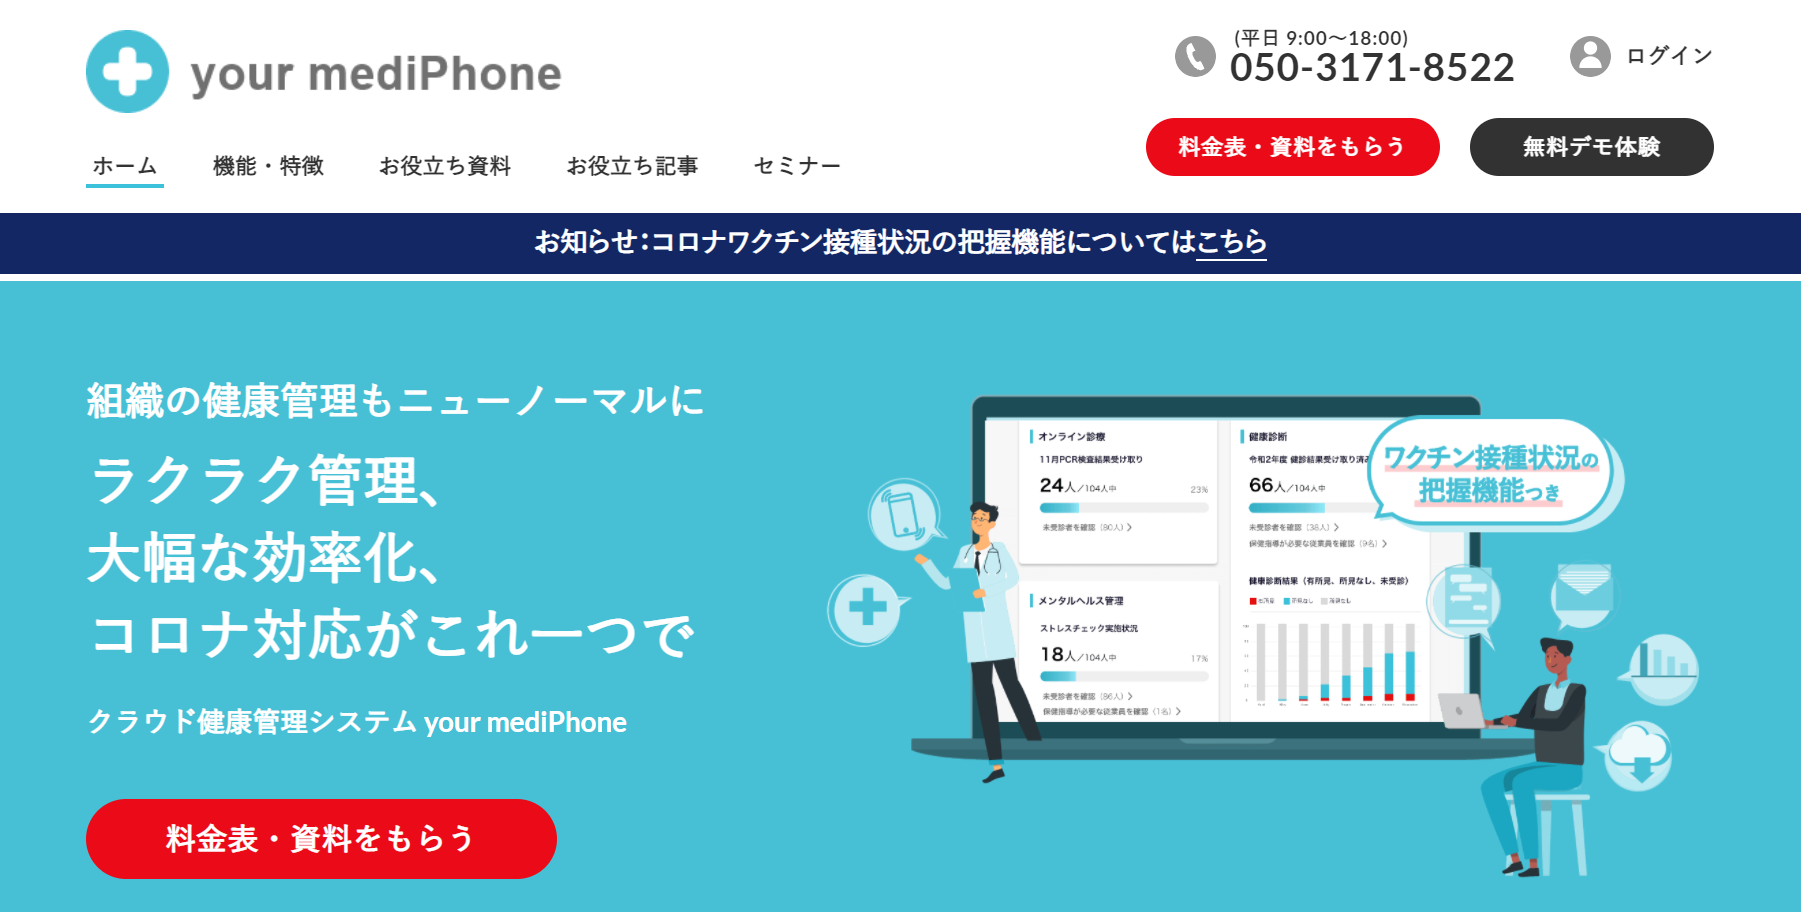 your mediPhone